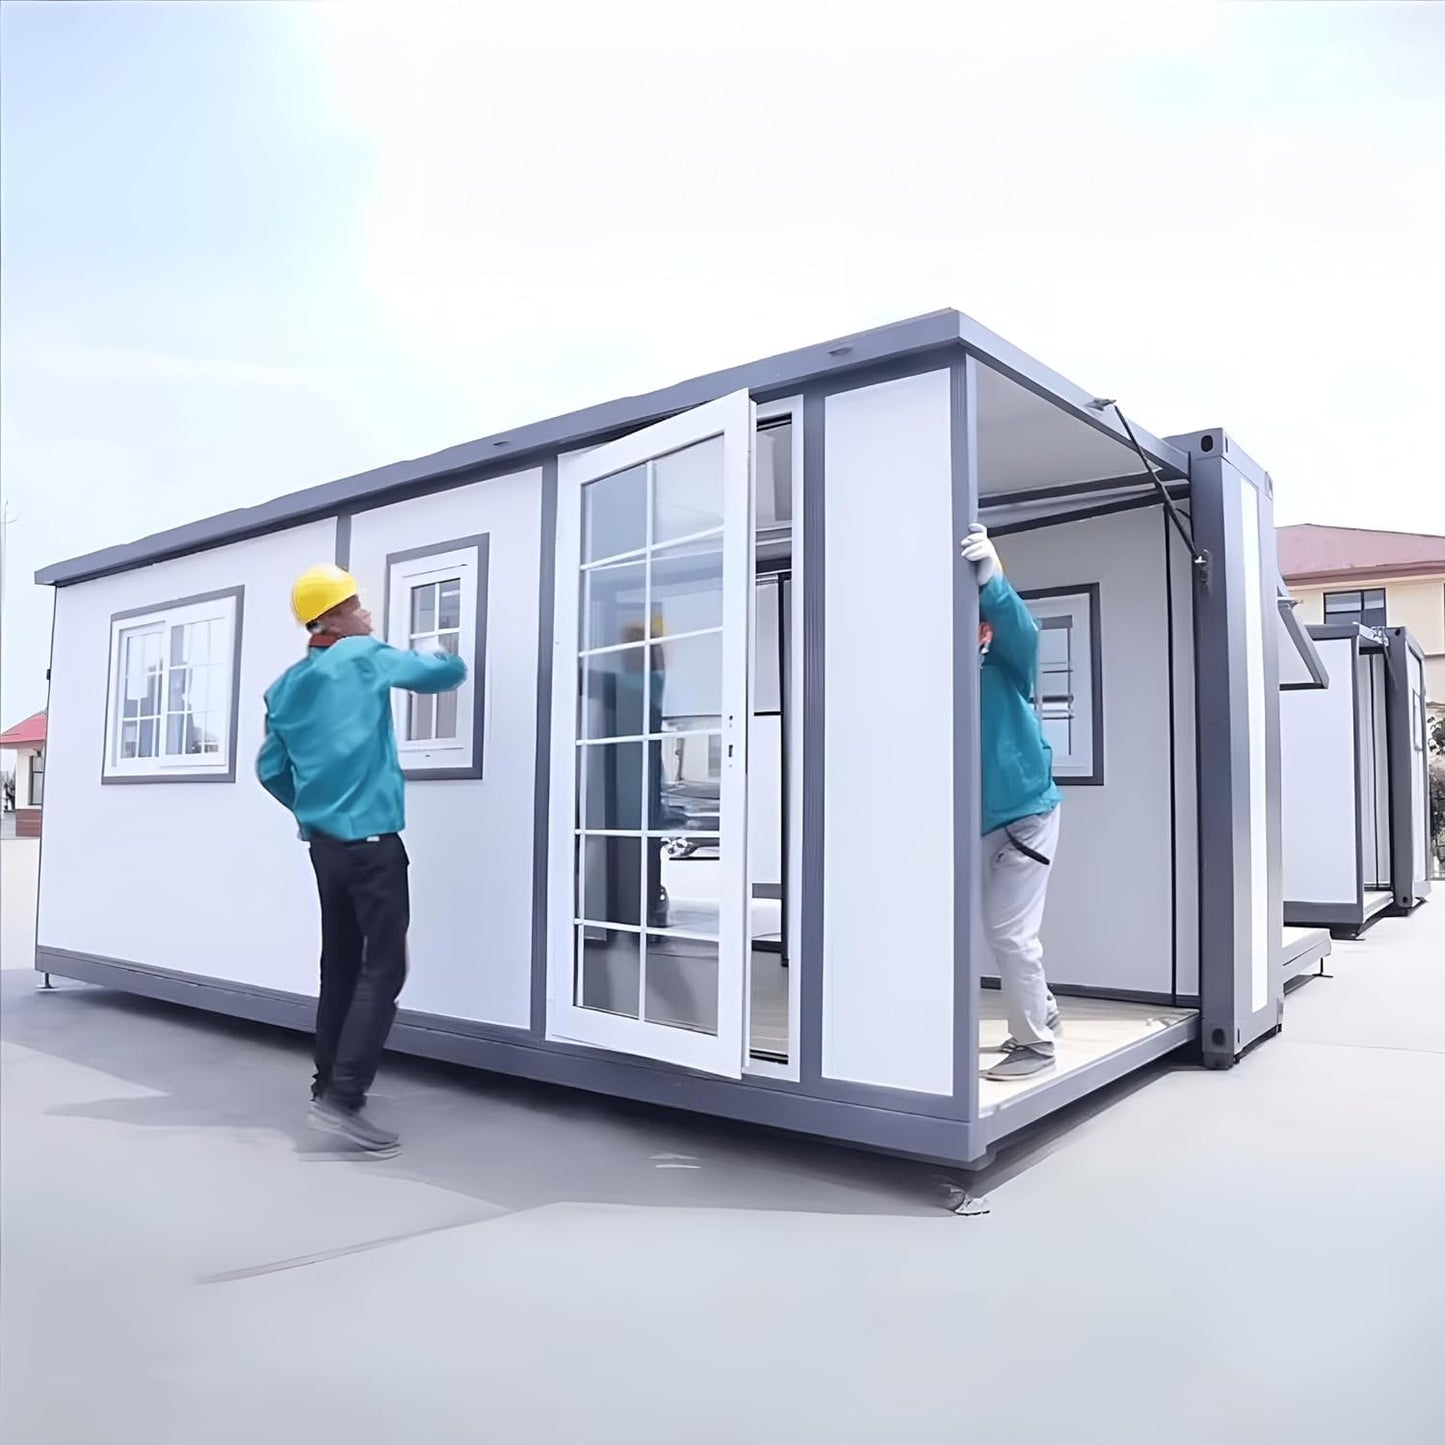 Tiny Home Kit Prefab House, (16.5x20Ft) Portable & Foldable Container House, a Great House to Live in, Versatile for Various uses, A Great Option for Movable Living